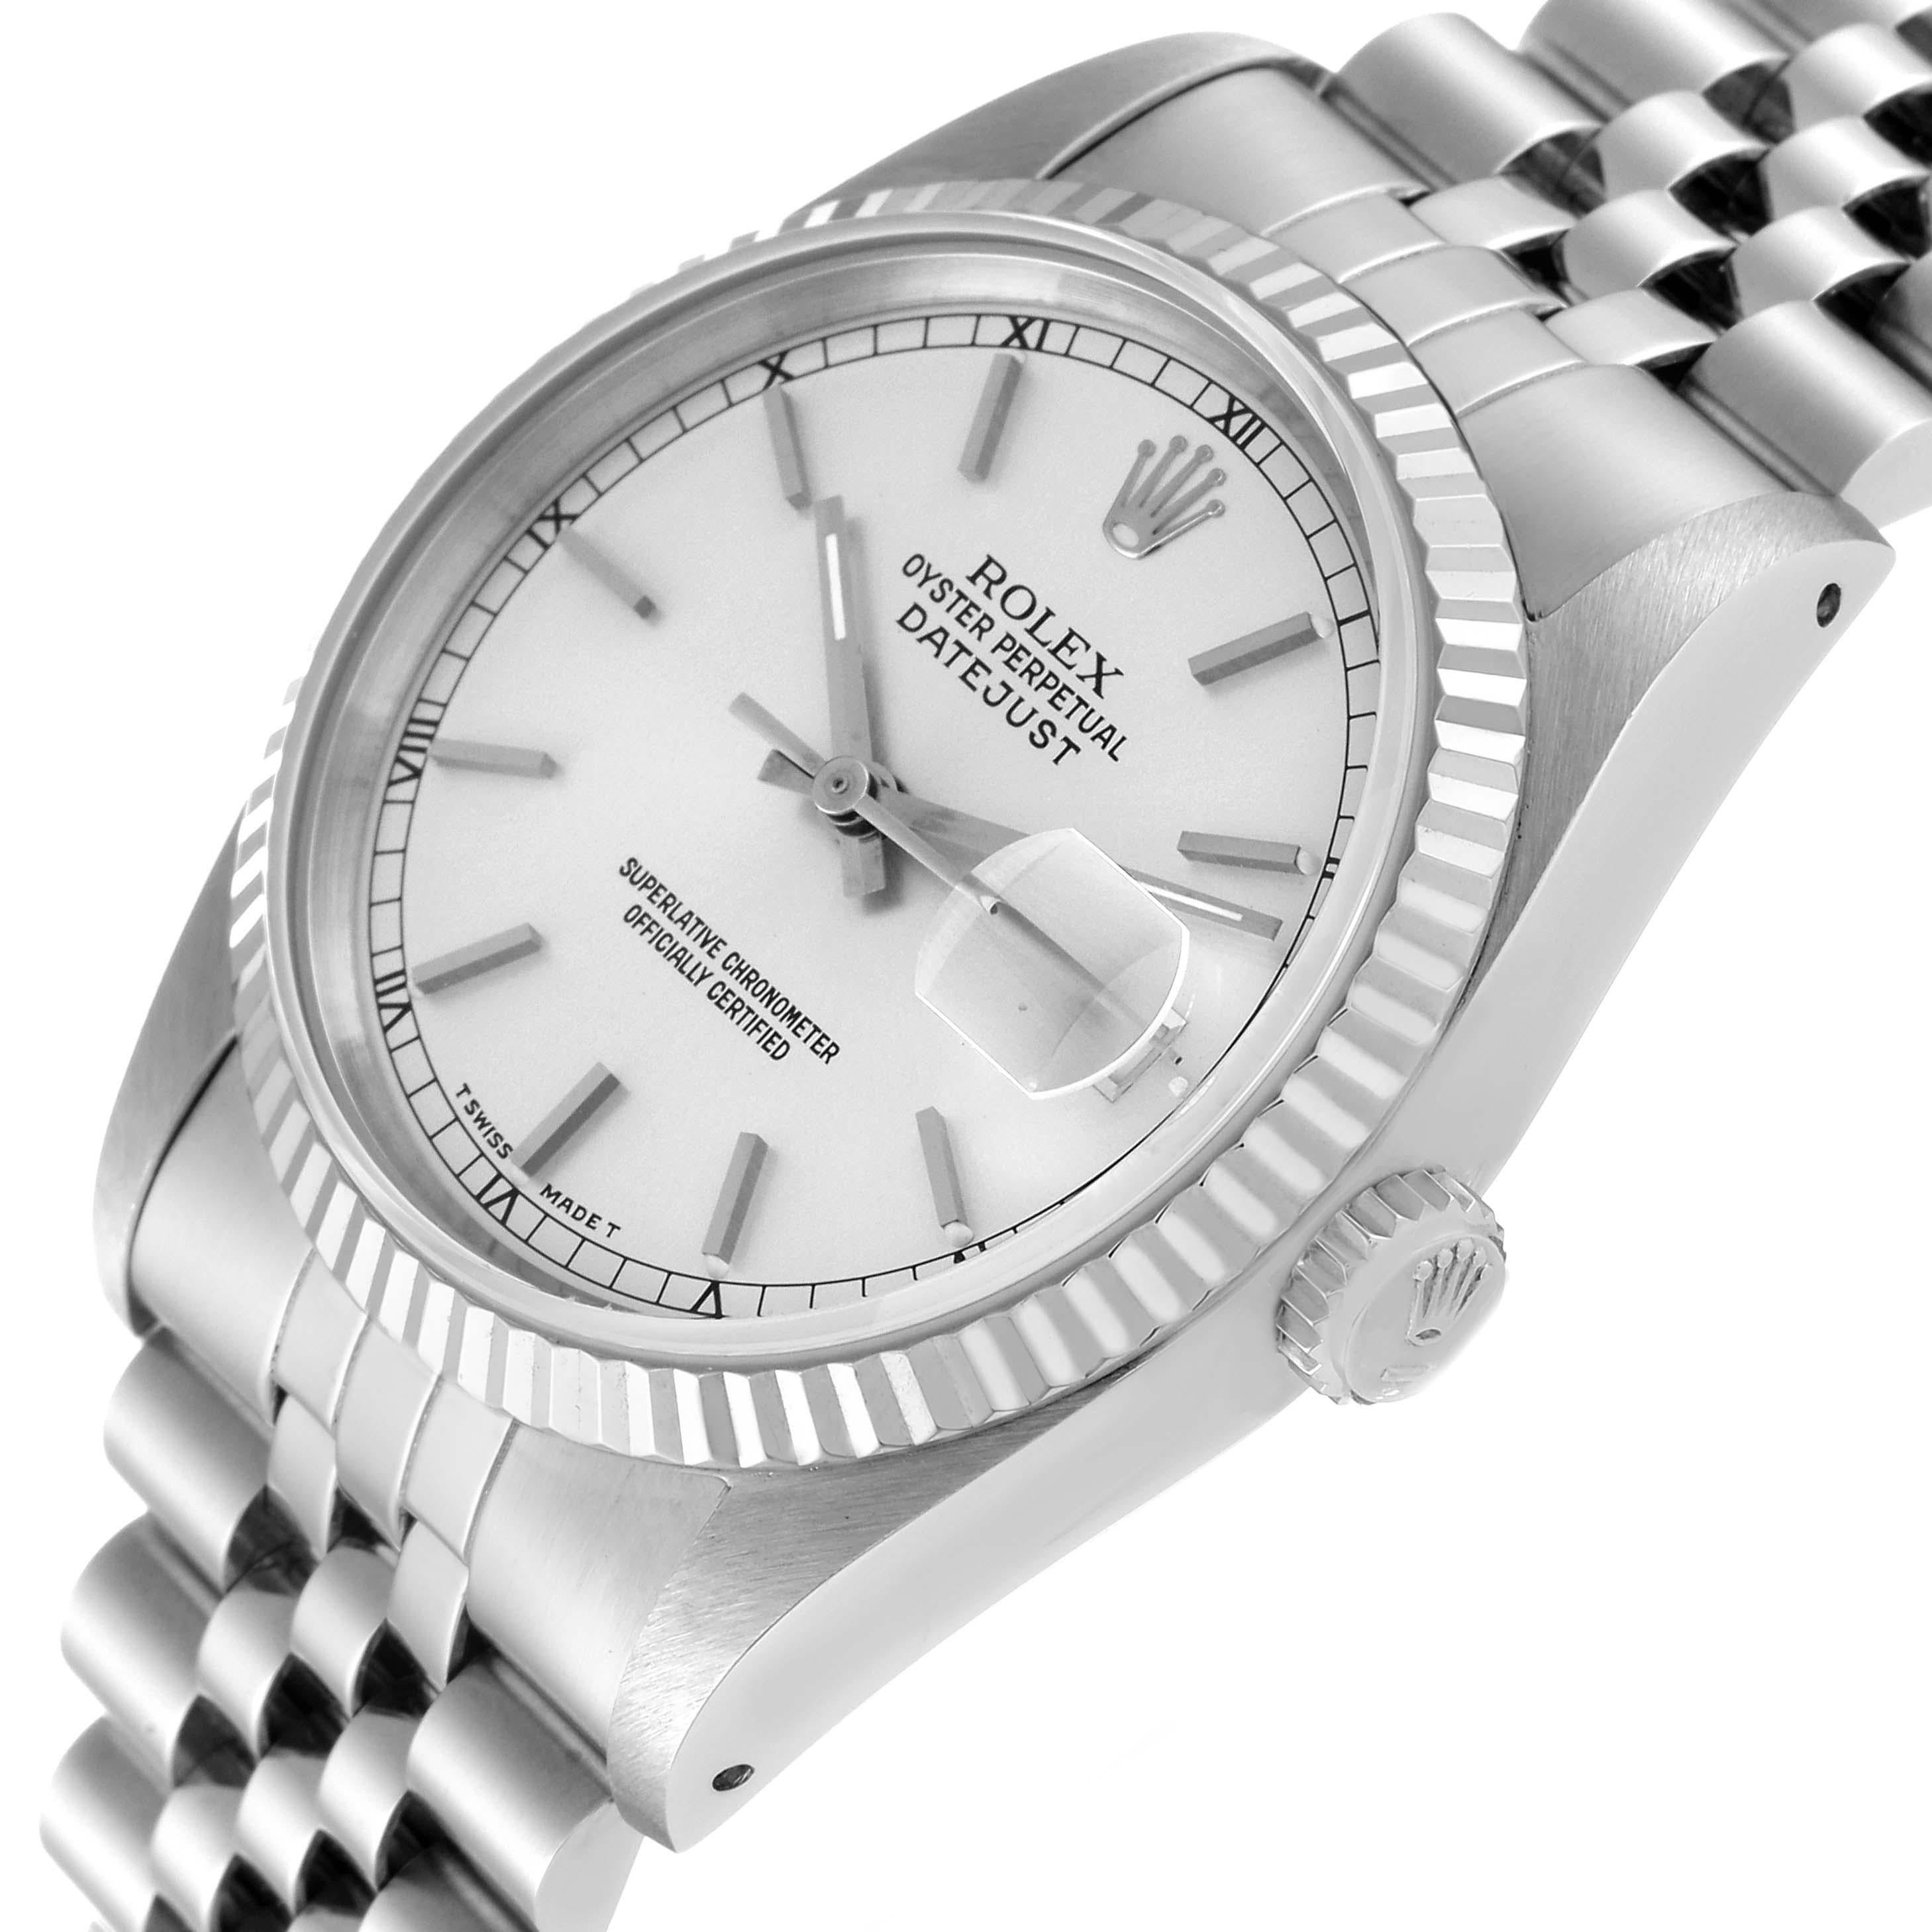 Rolex Datejust Silver Dial Steel White Gold Mens Watch 16234 For Sale 4